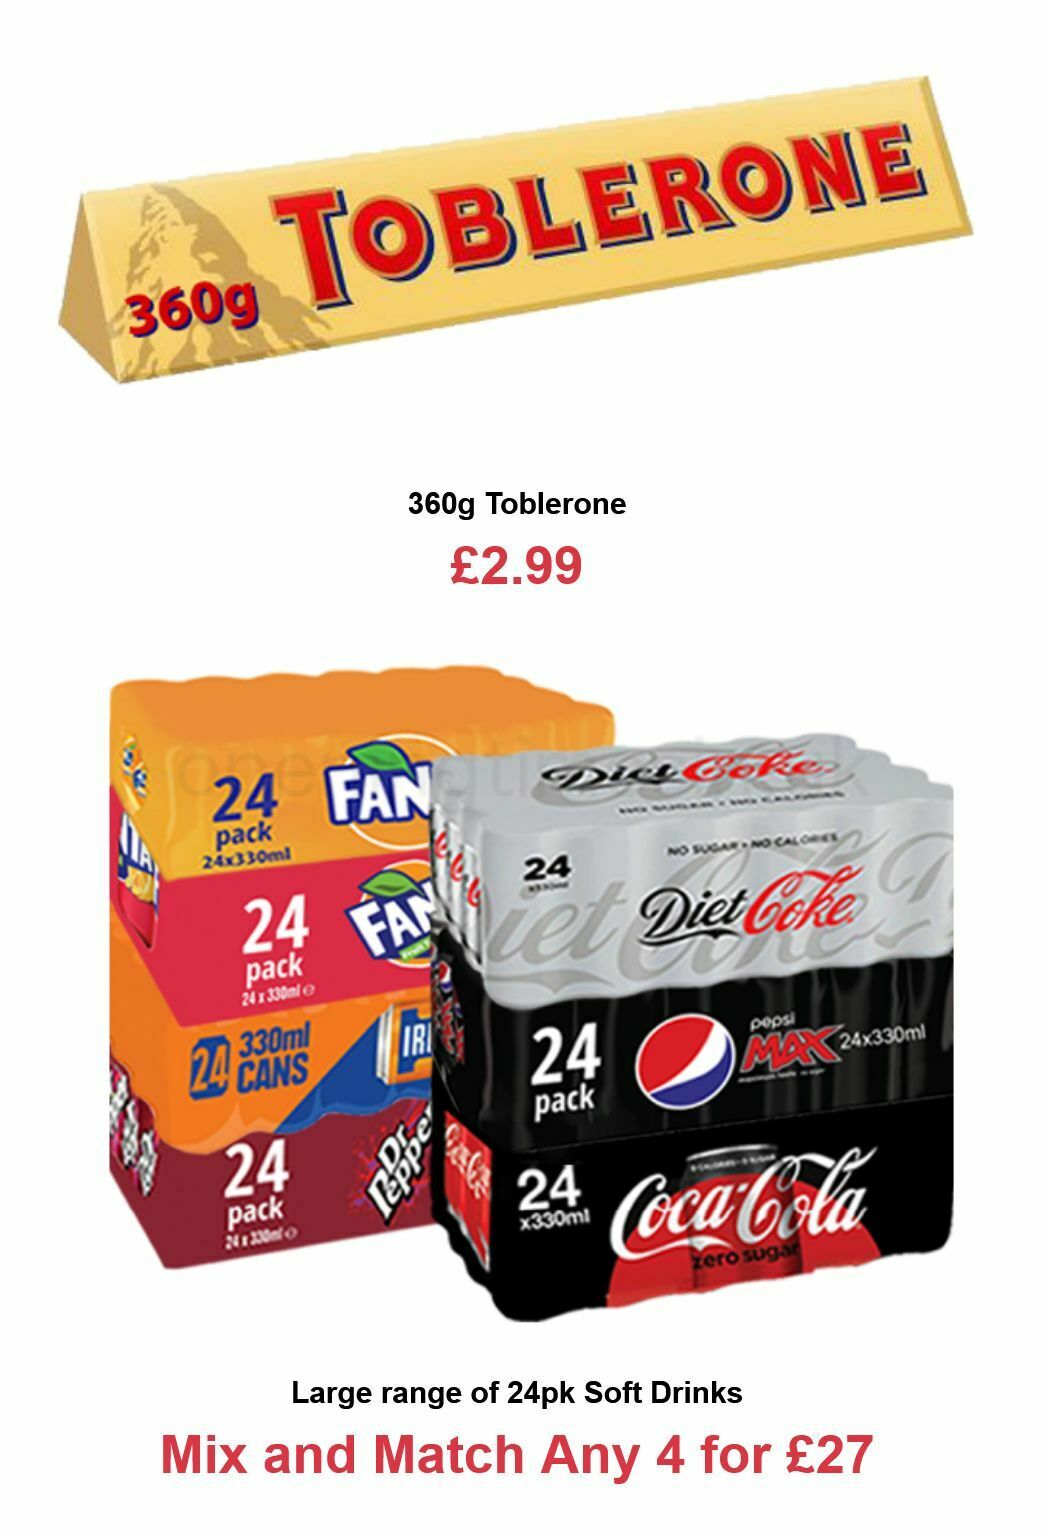 Farmfoods Offers from 27 October